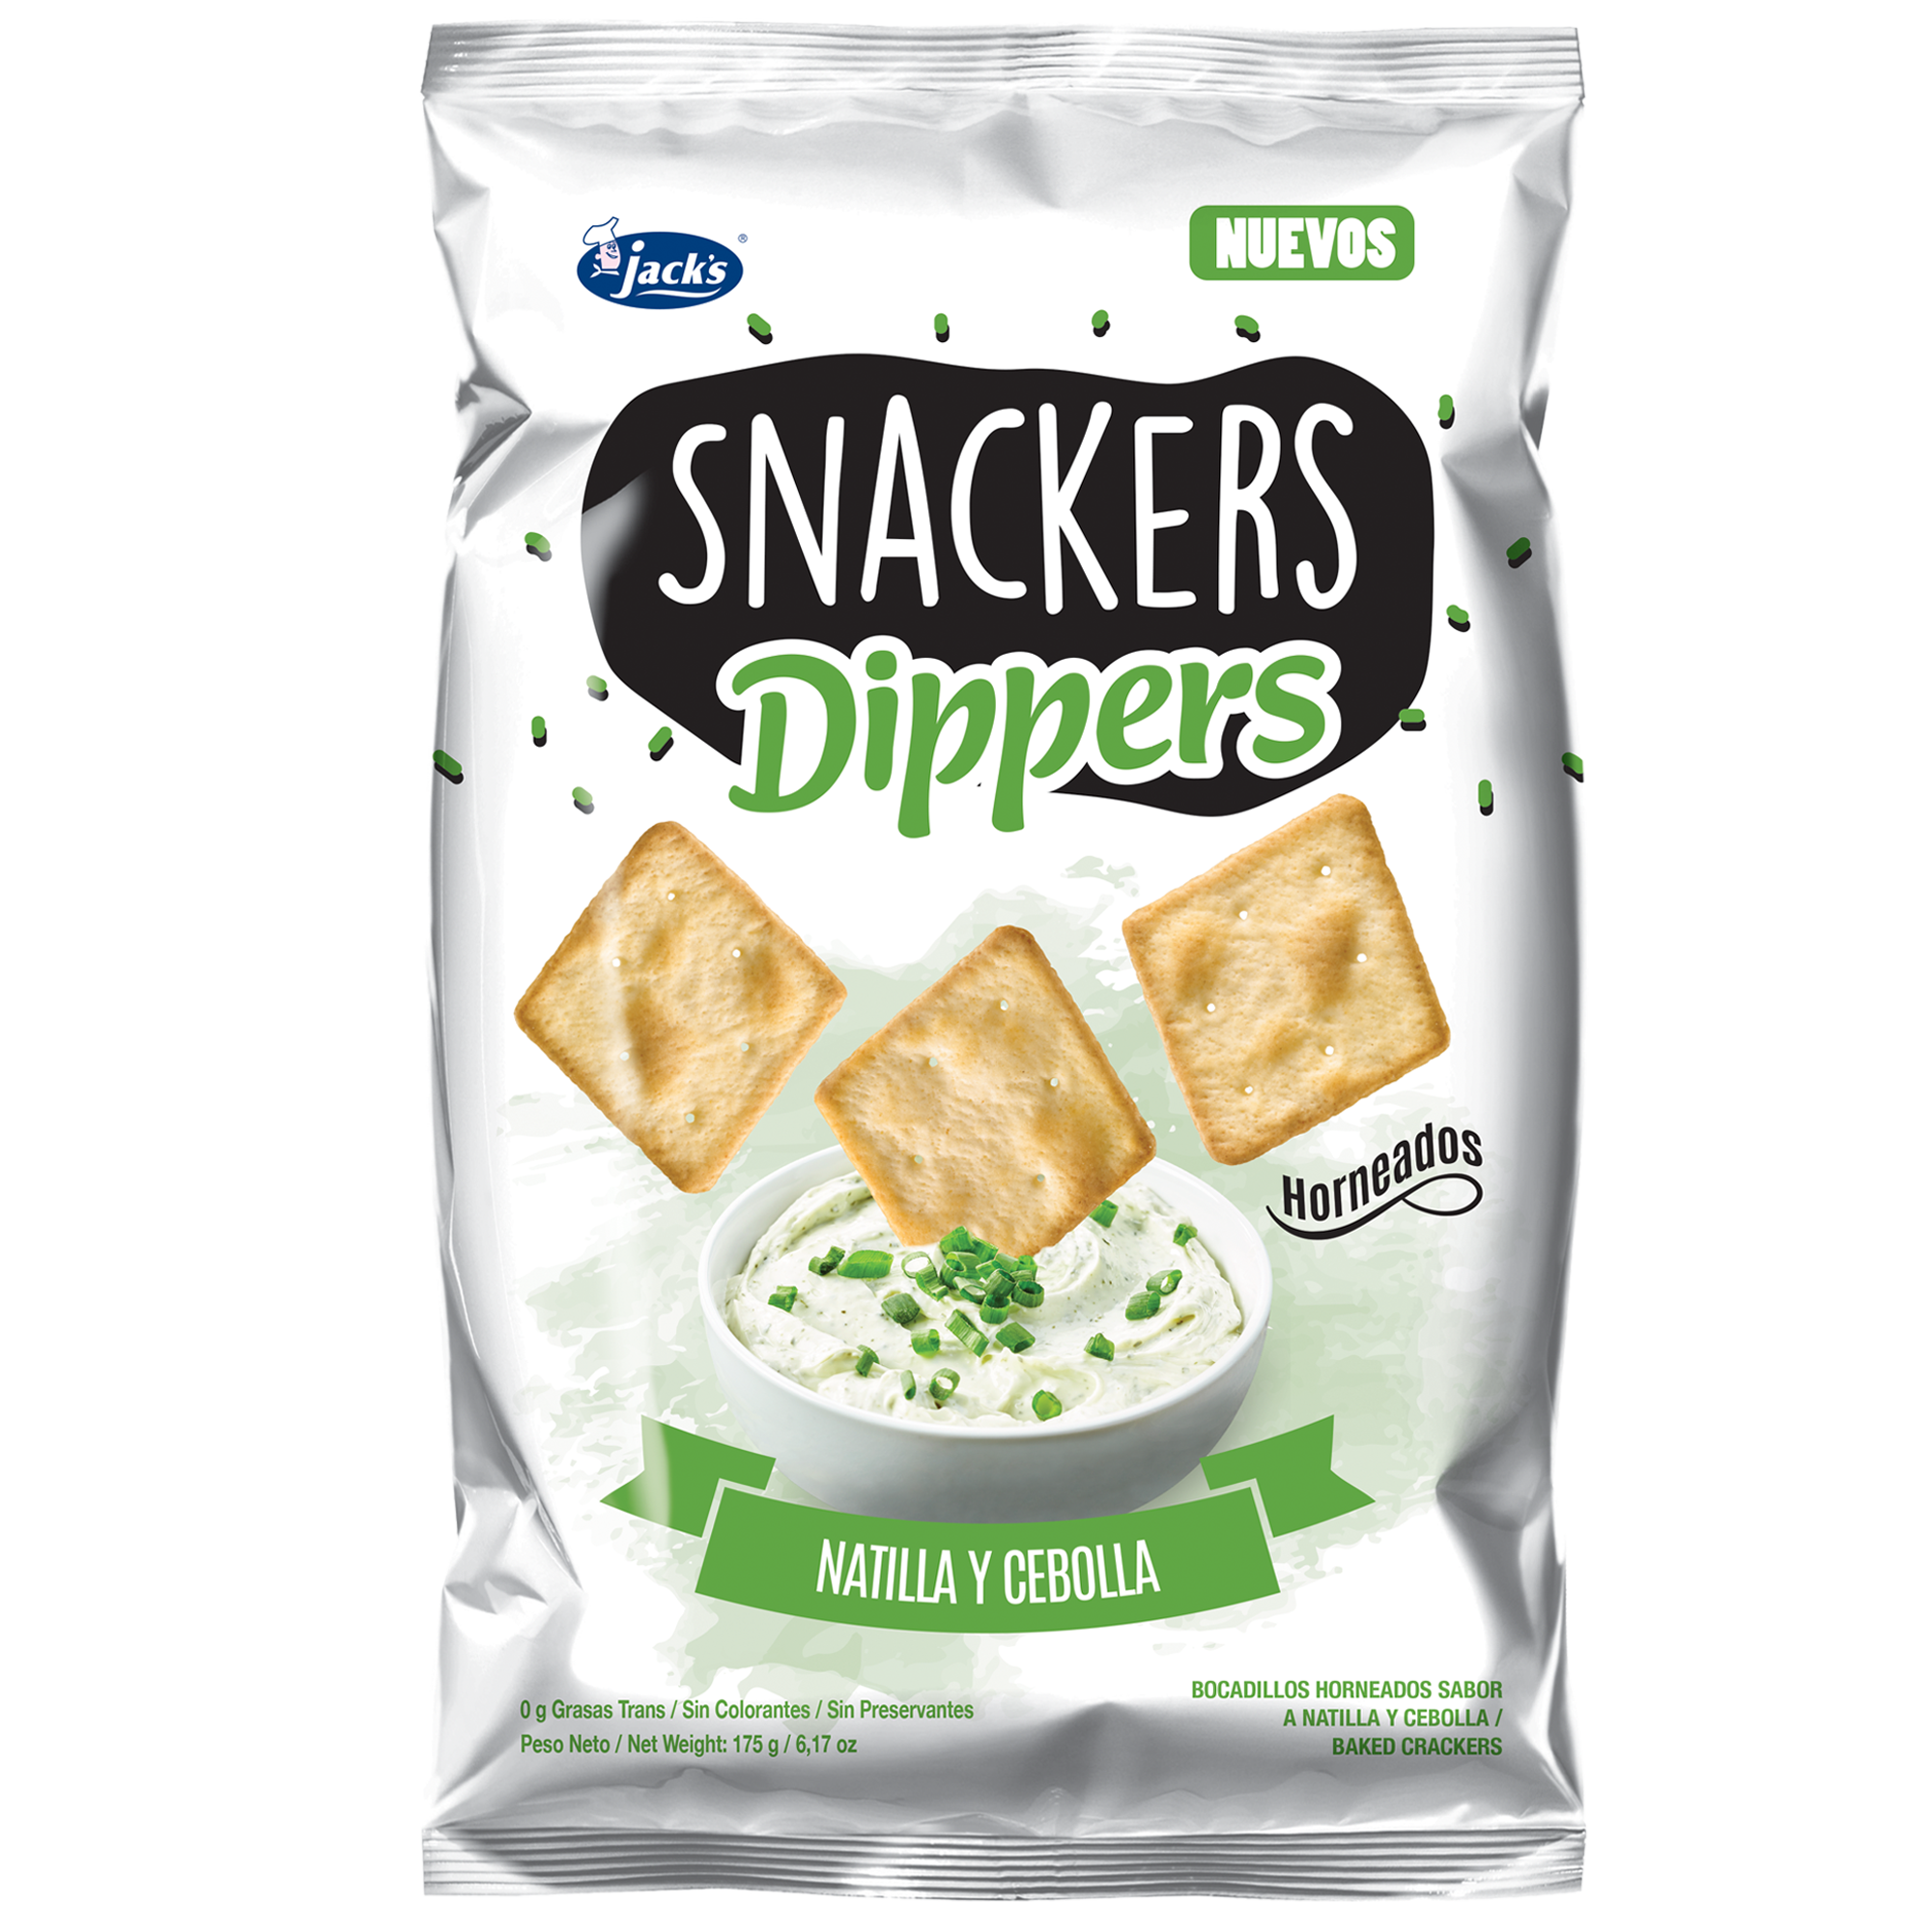 SNACKERS-DIPPERS-indiv-2000x2000-pag-web